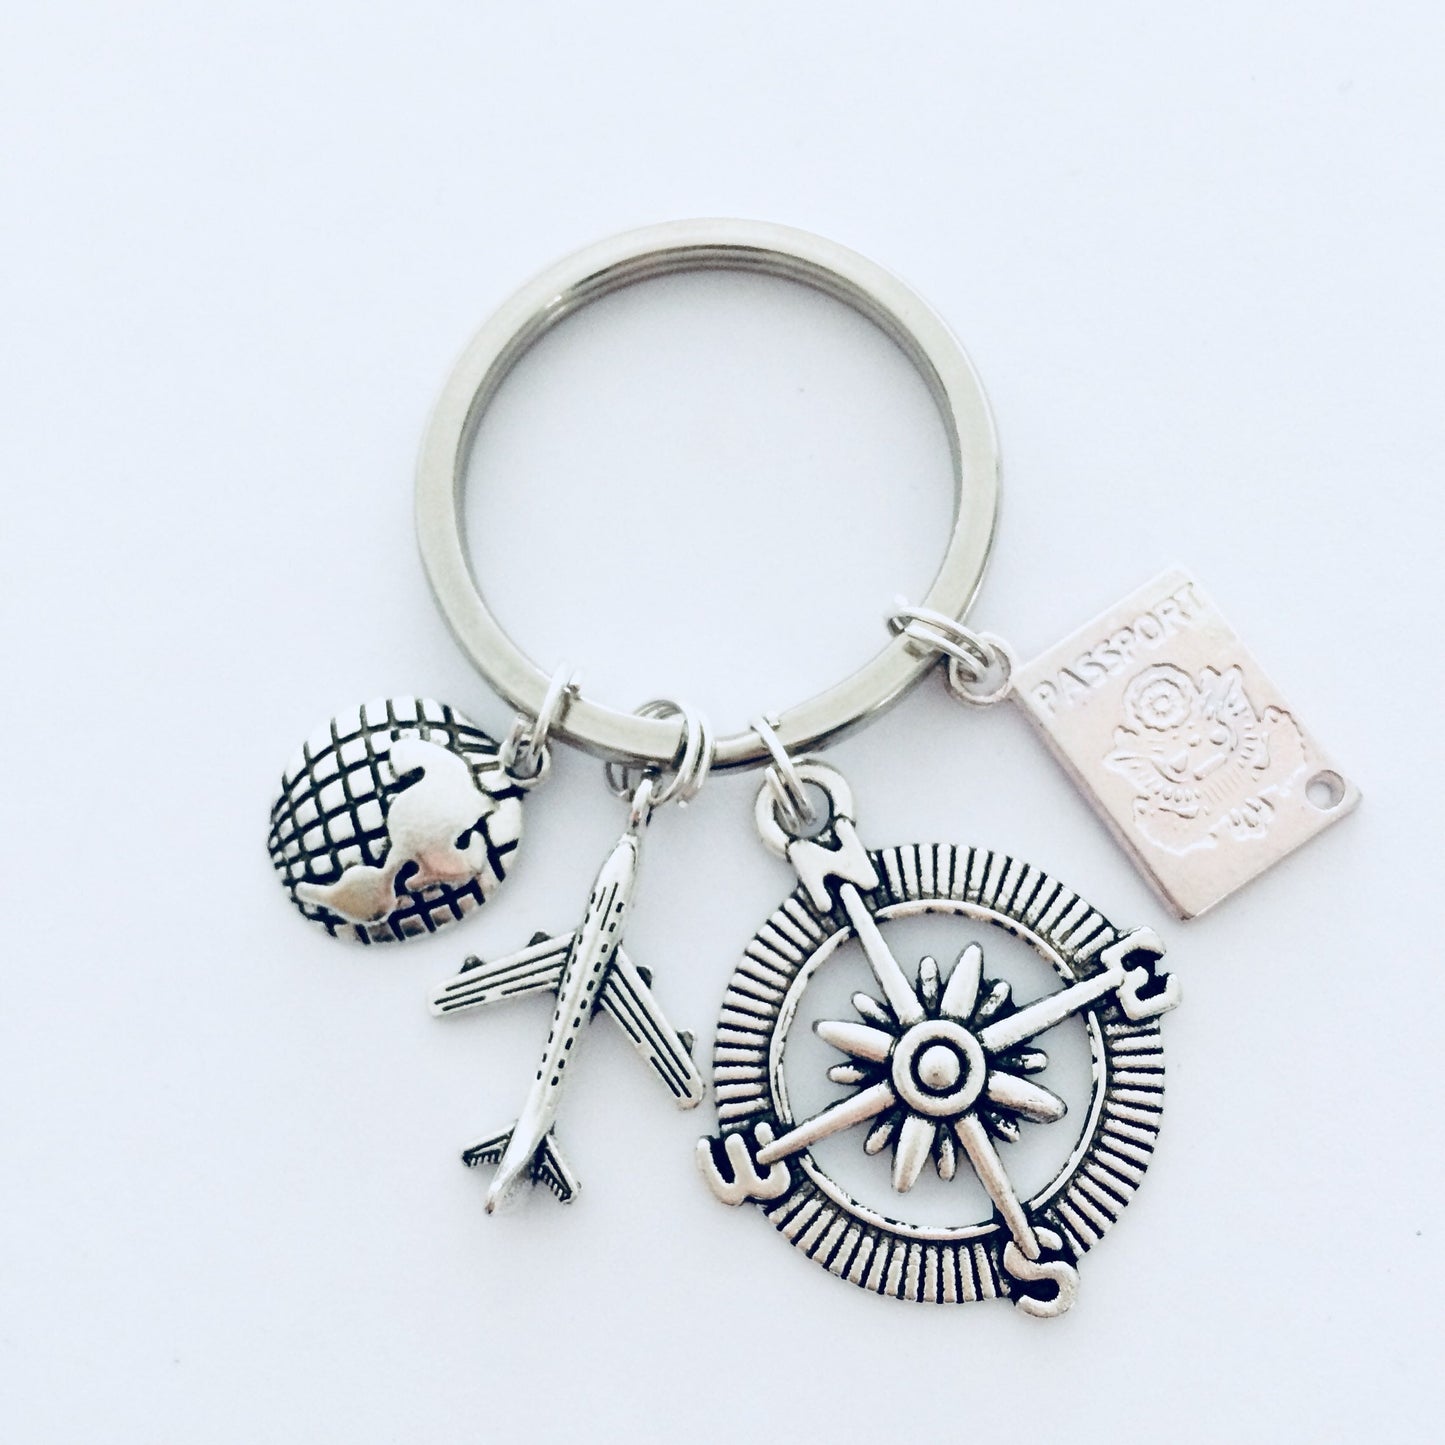 Travel Keychain, Keyring, Bag Charm, Travel Accessory, Compass, Travelling Gift, Luggage Keyring, Earth Gift, Aeroplane Gift, Passport Gift.